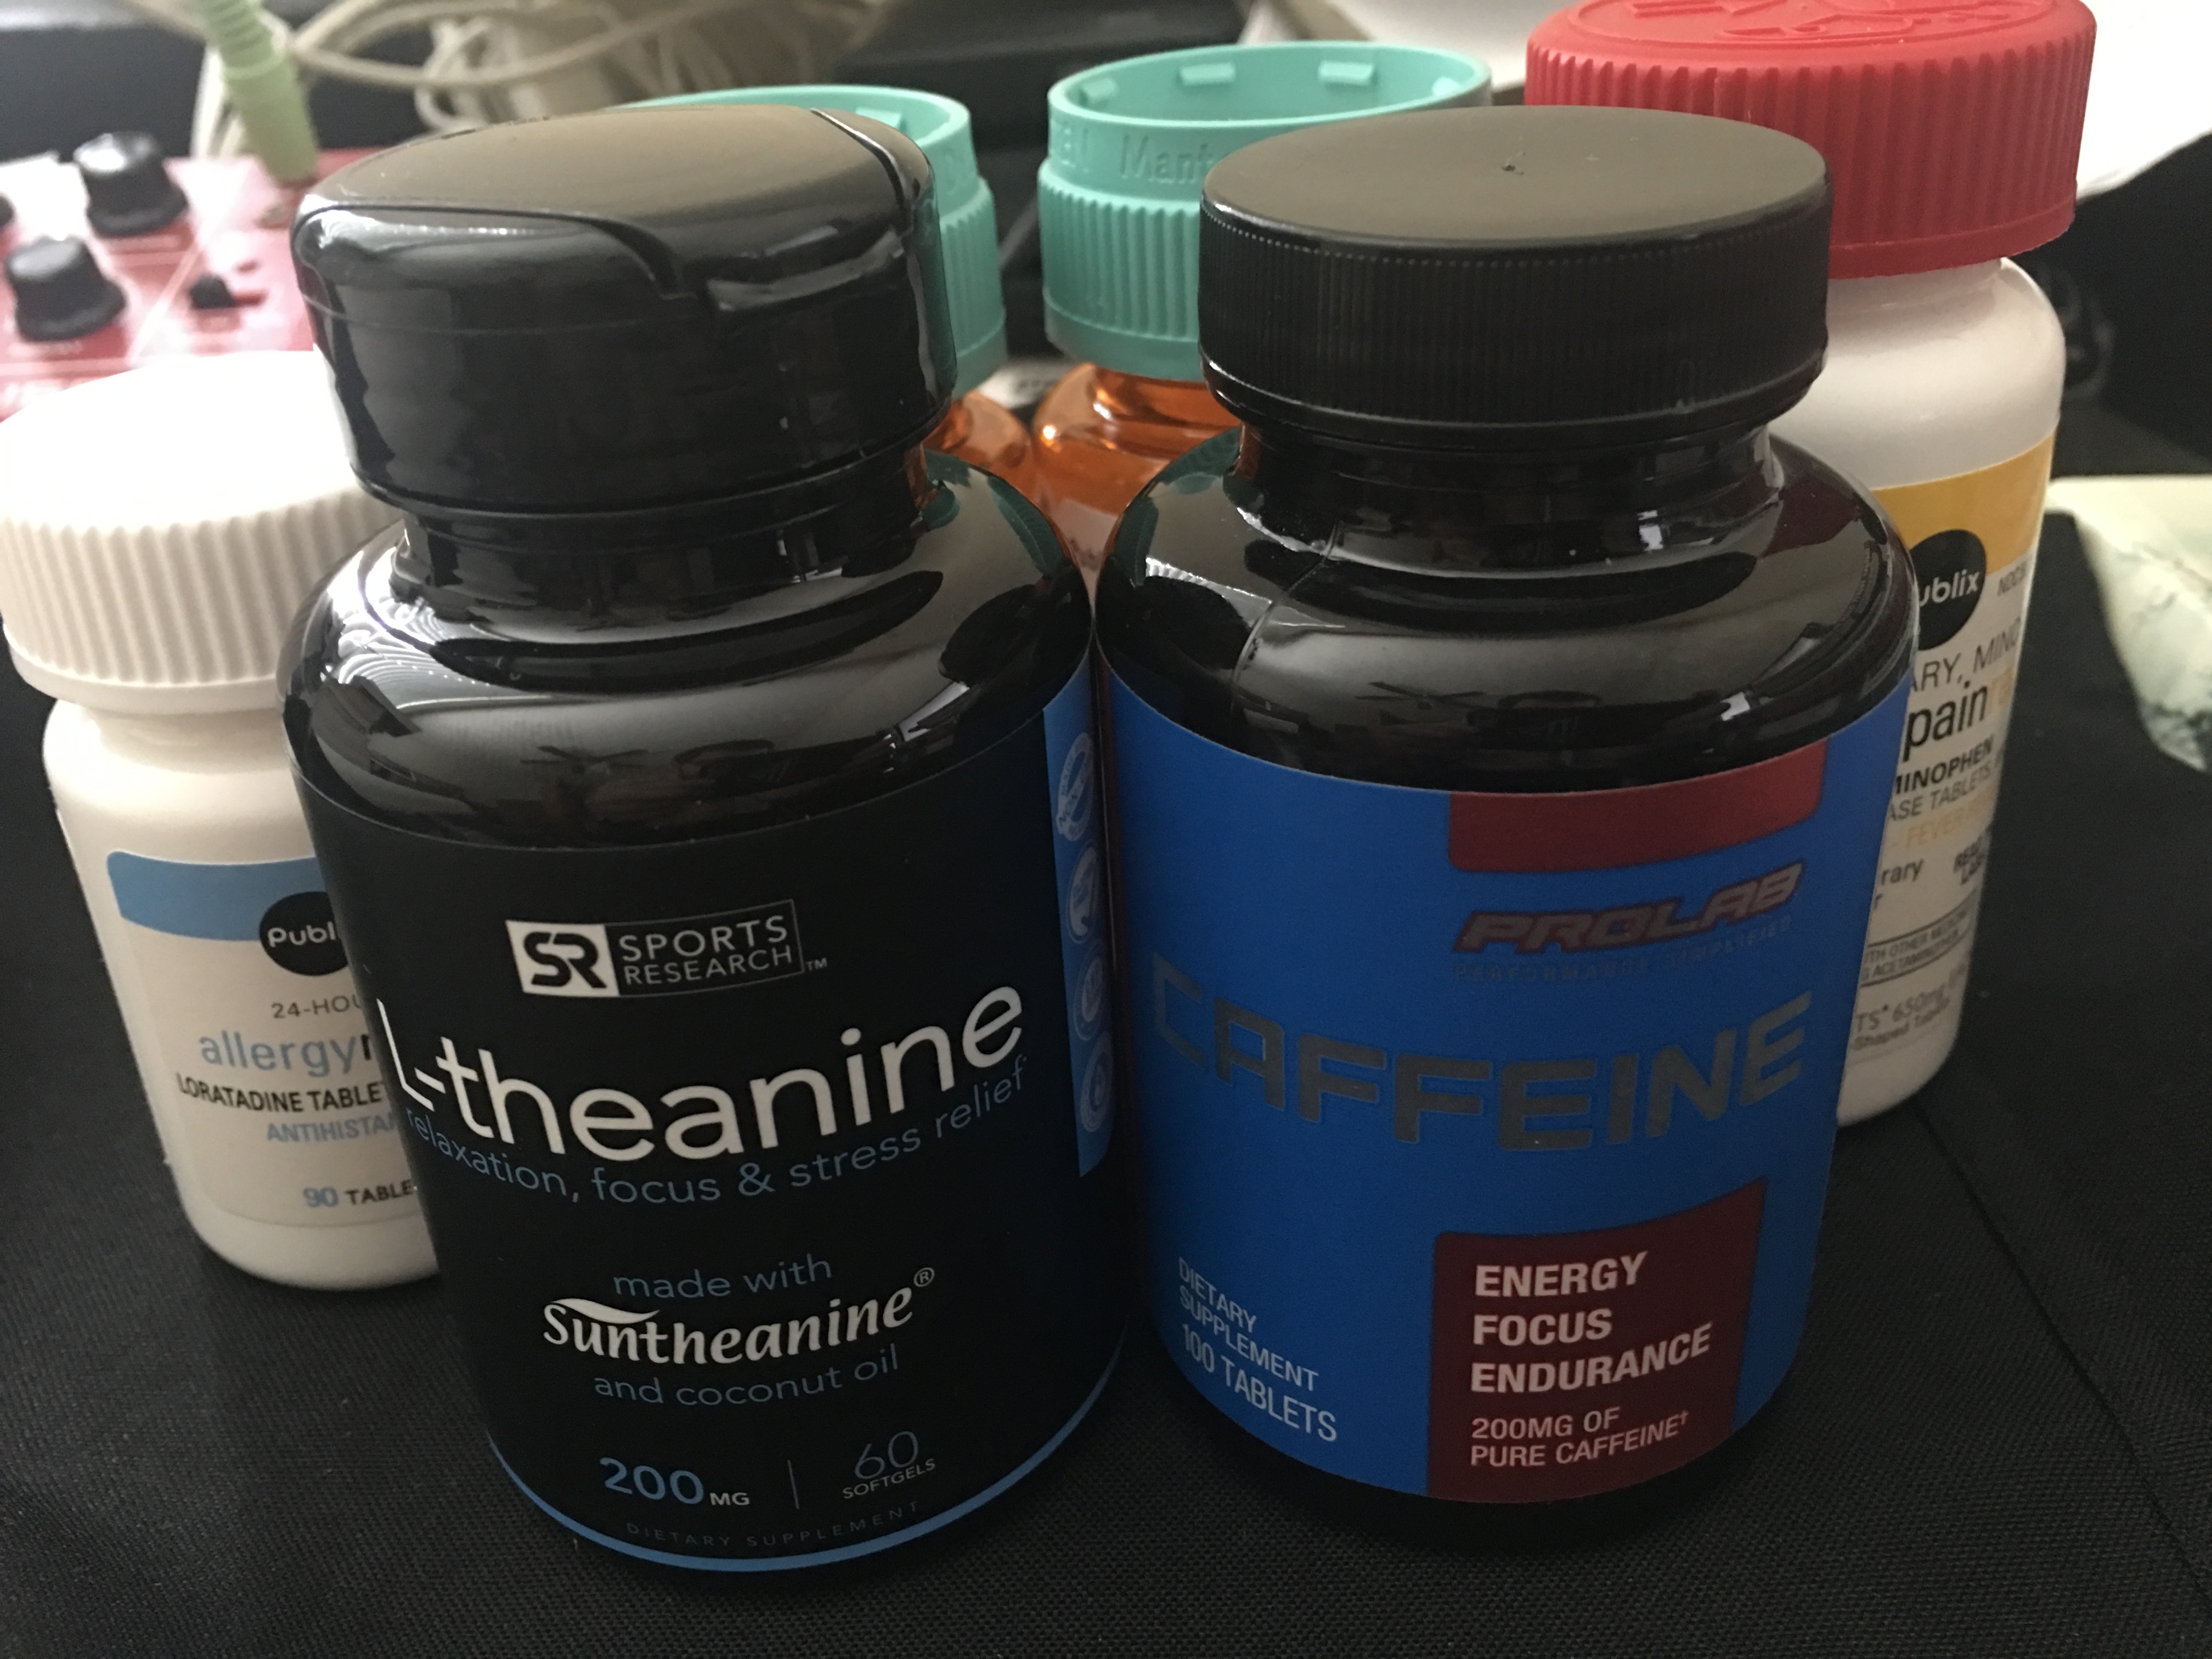 my current nootropic stack (including medications, diet, etc)